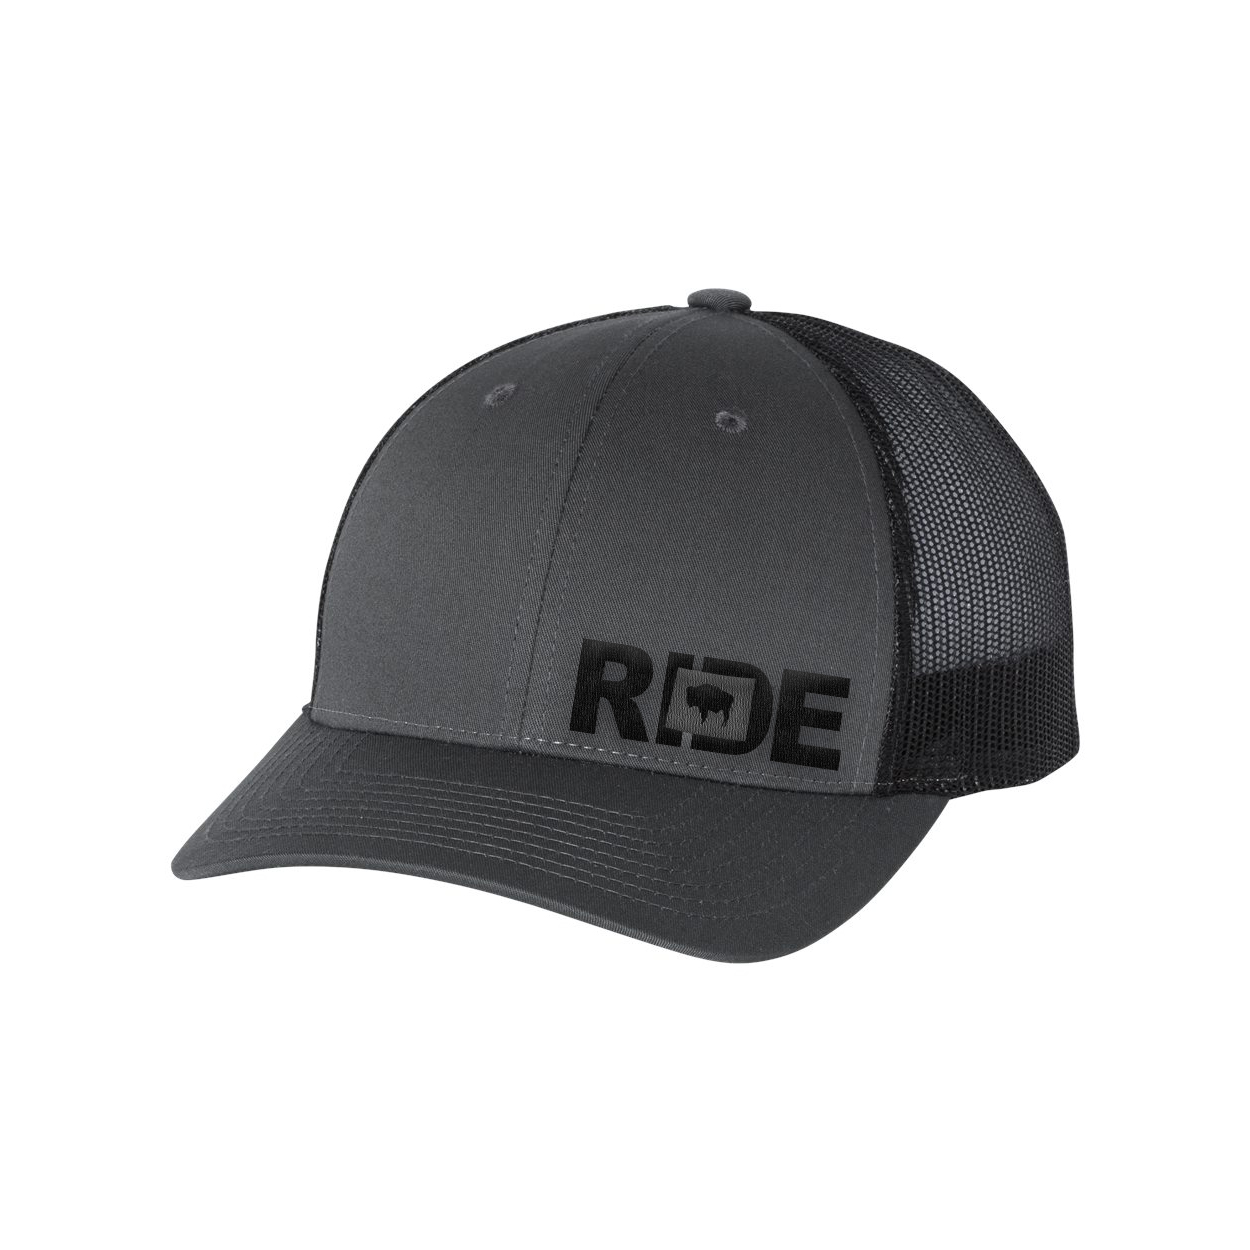 Ride Wyoming Night Out Embroidered Snapback Trucker Hat Gray/Black